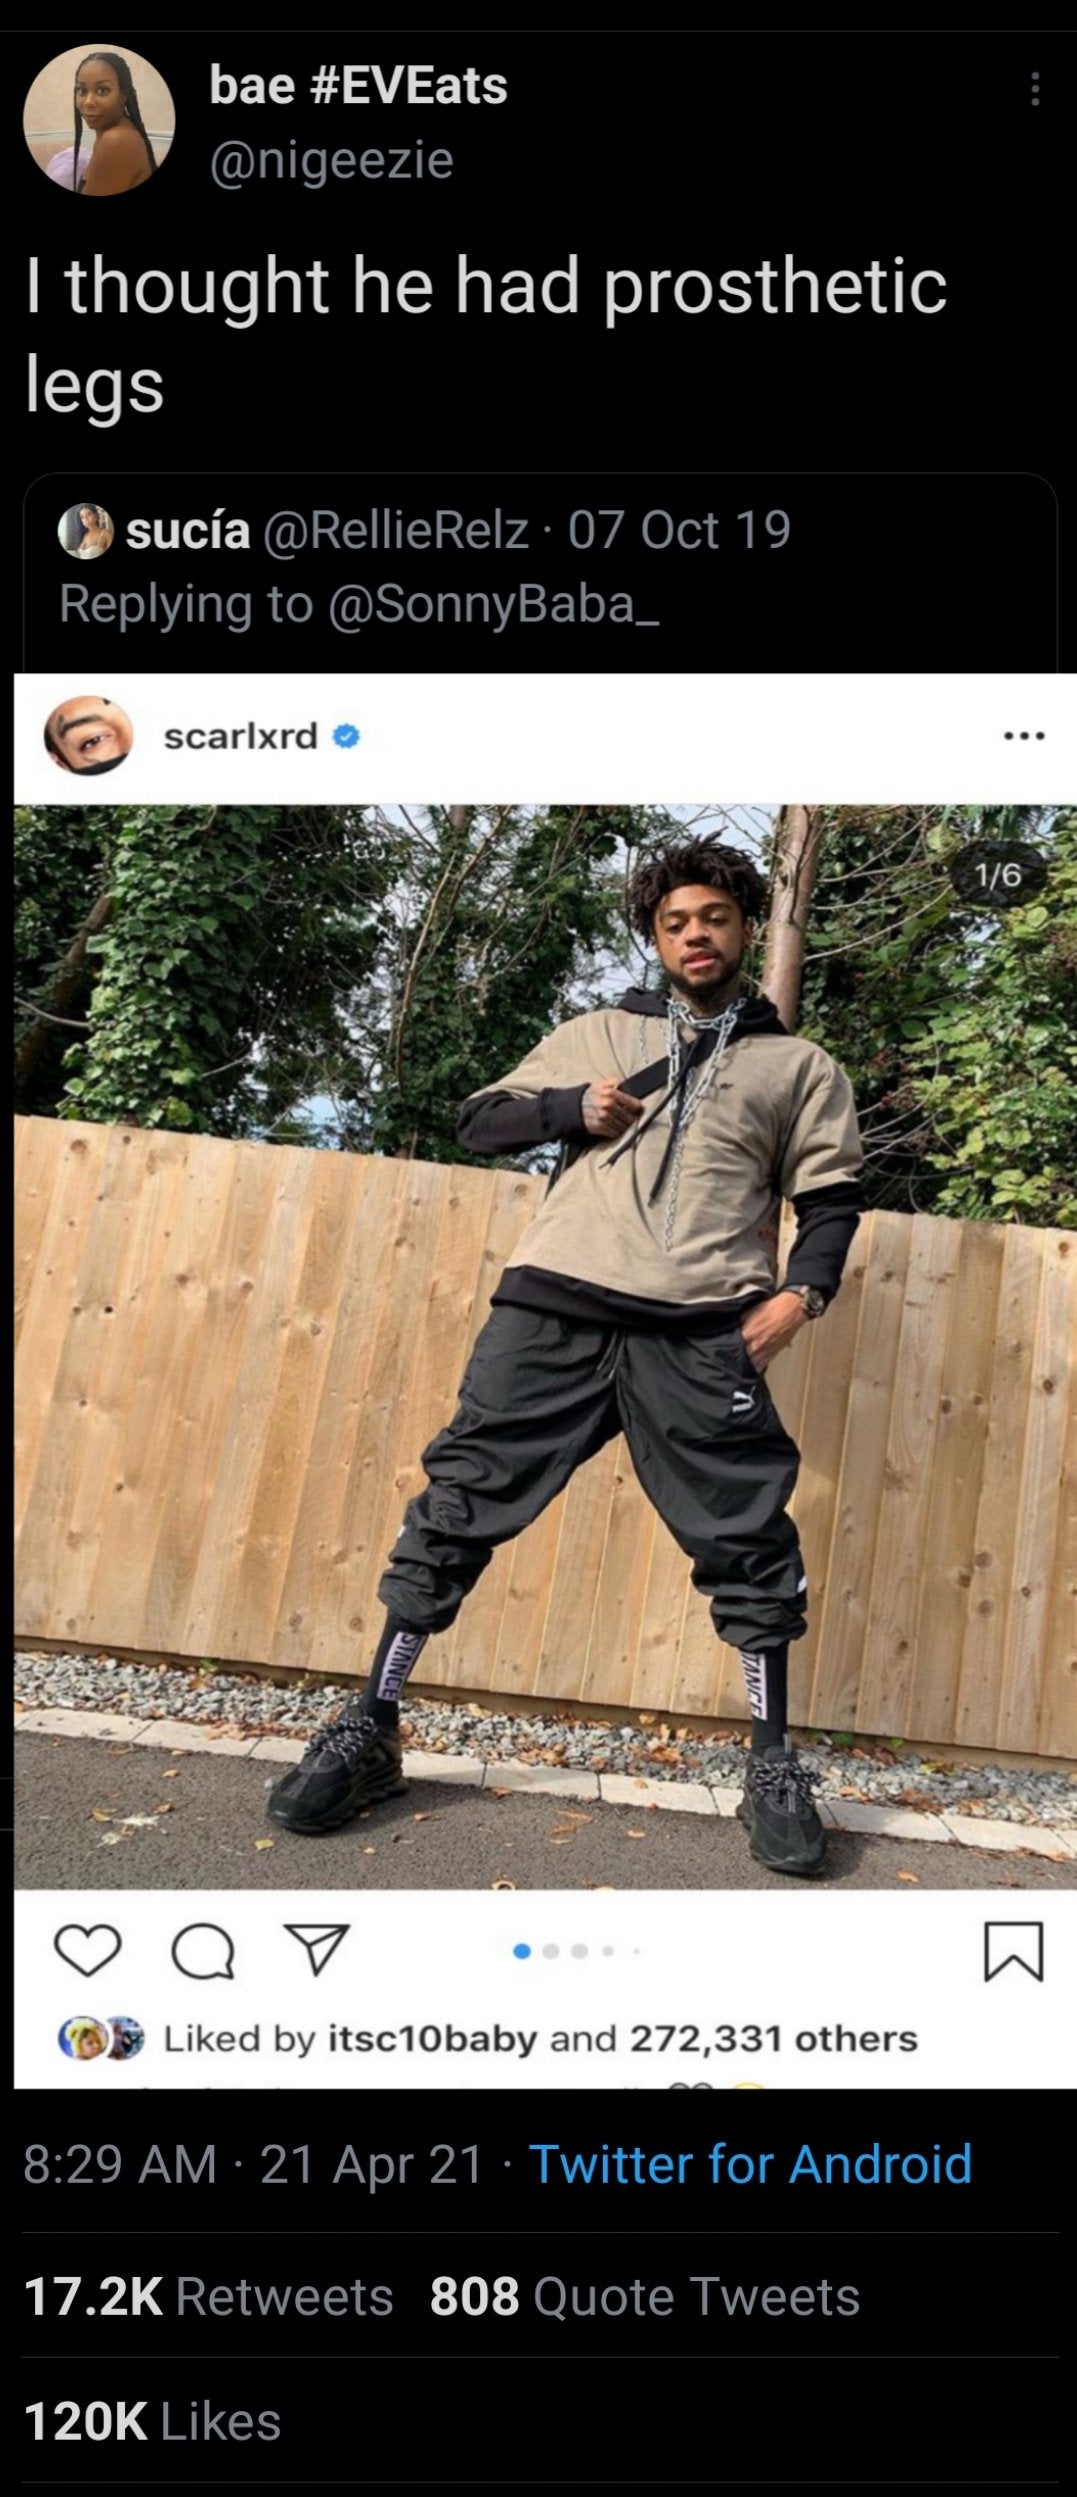 funny tweets - photo caption - bae I thought he had prosthetic legs suca 07 Oct 19 scarlxrd 16 Siance Tance Q d by itsc10baby and 272,331 others 21 Apr 21 Twitter for Android 808 Quote Tweets